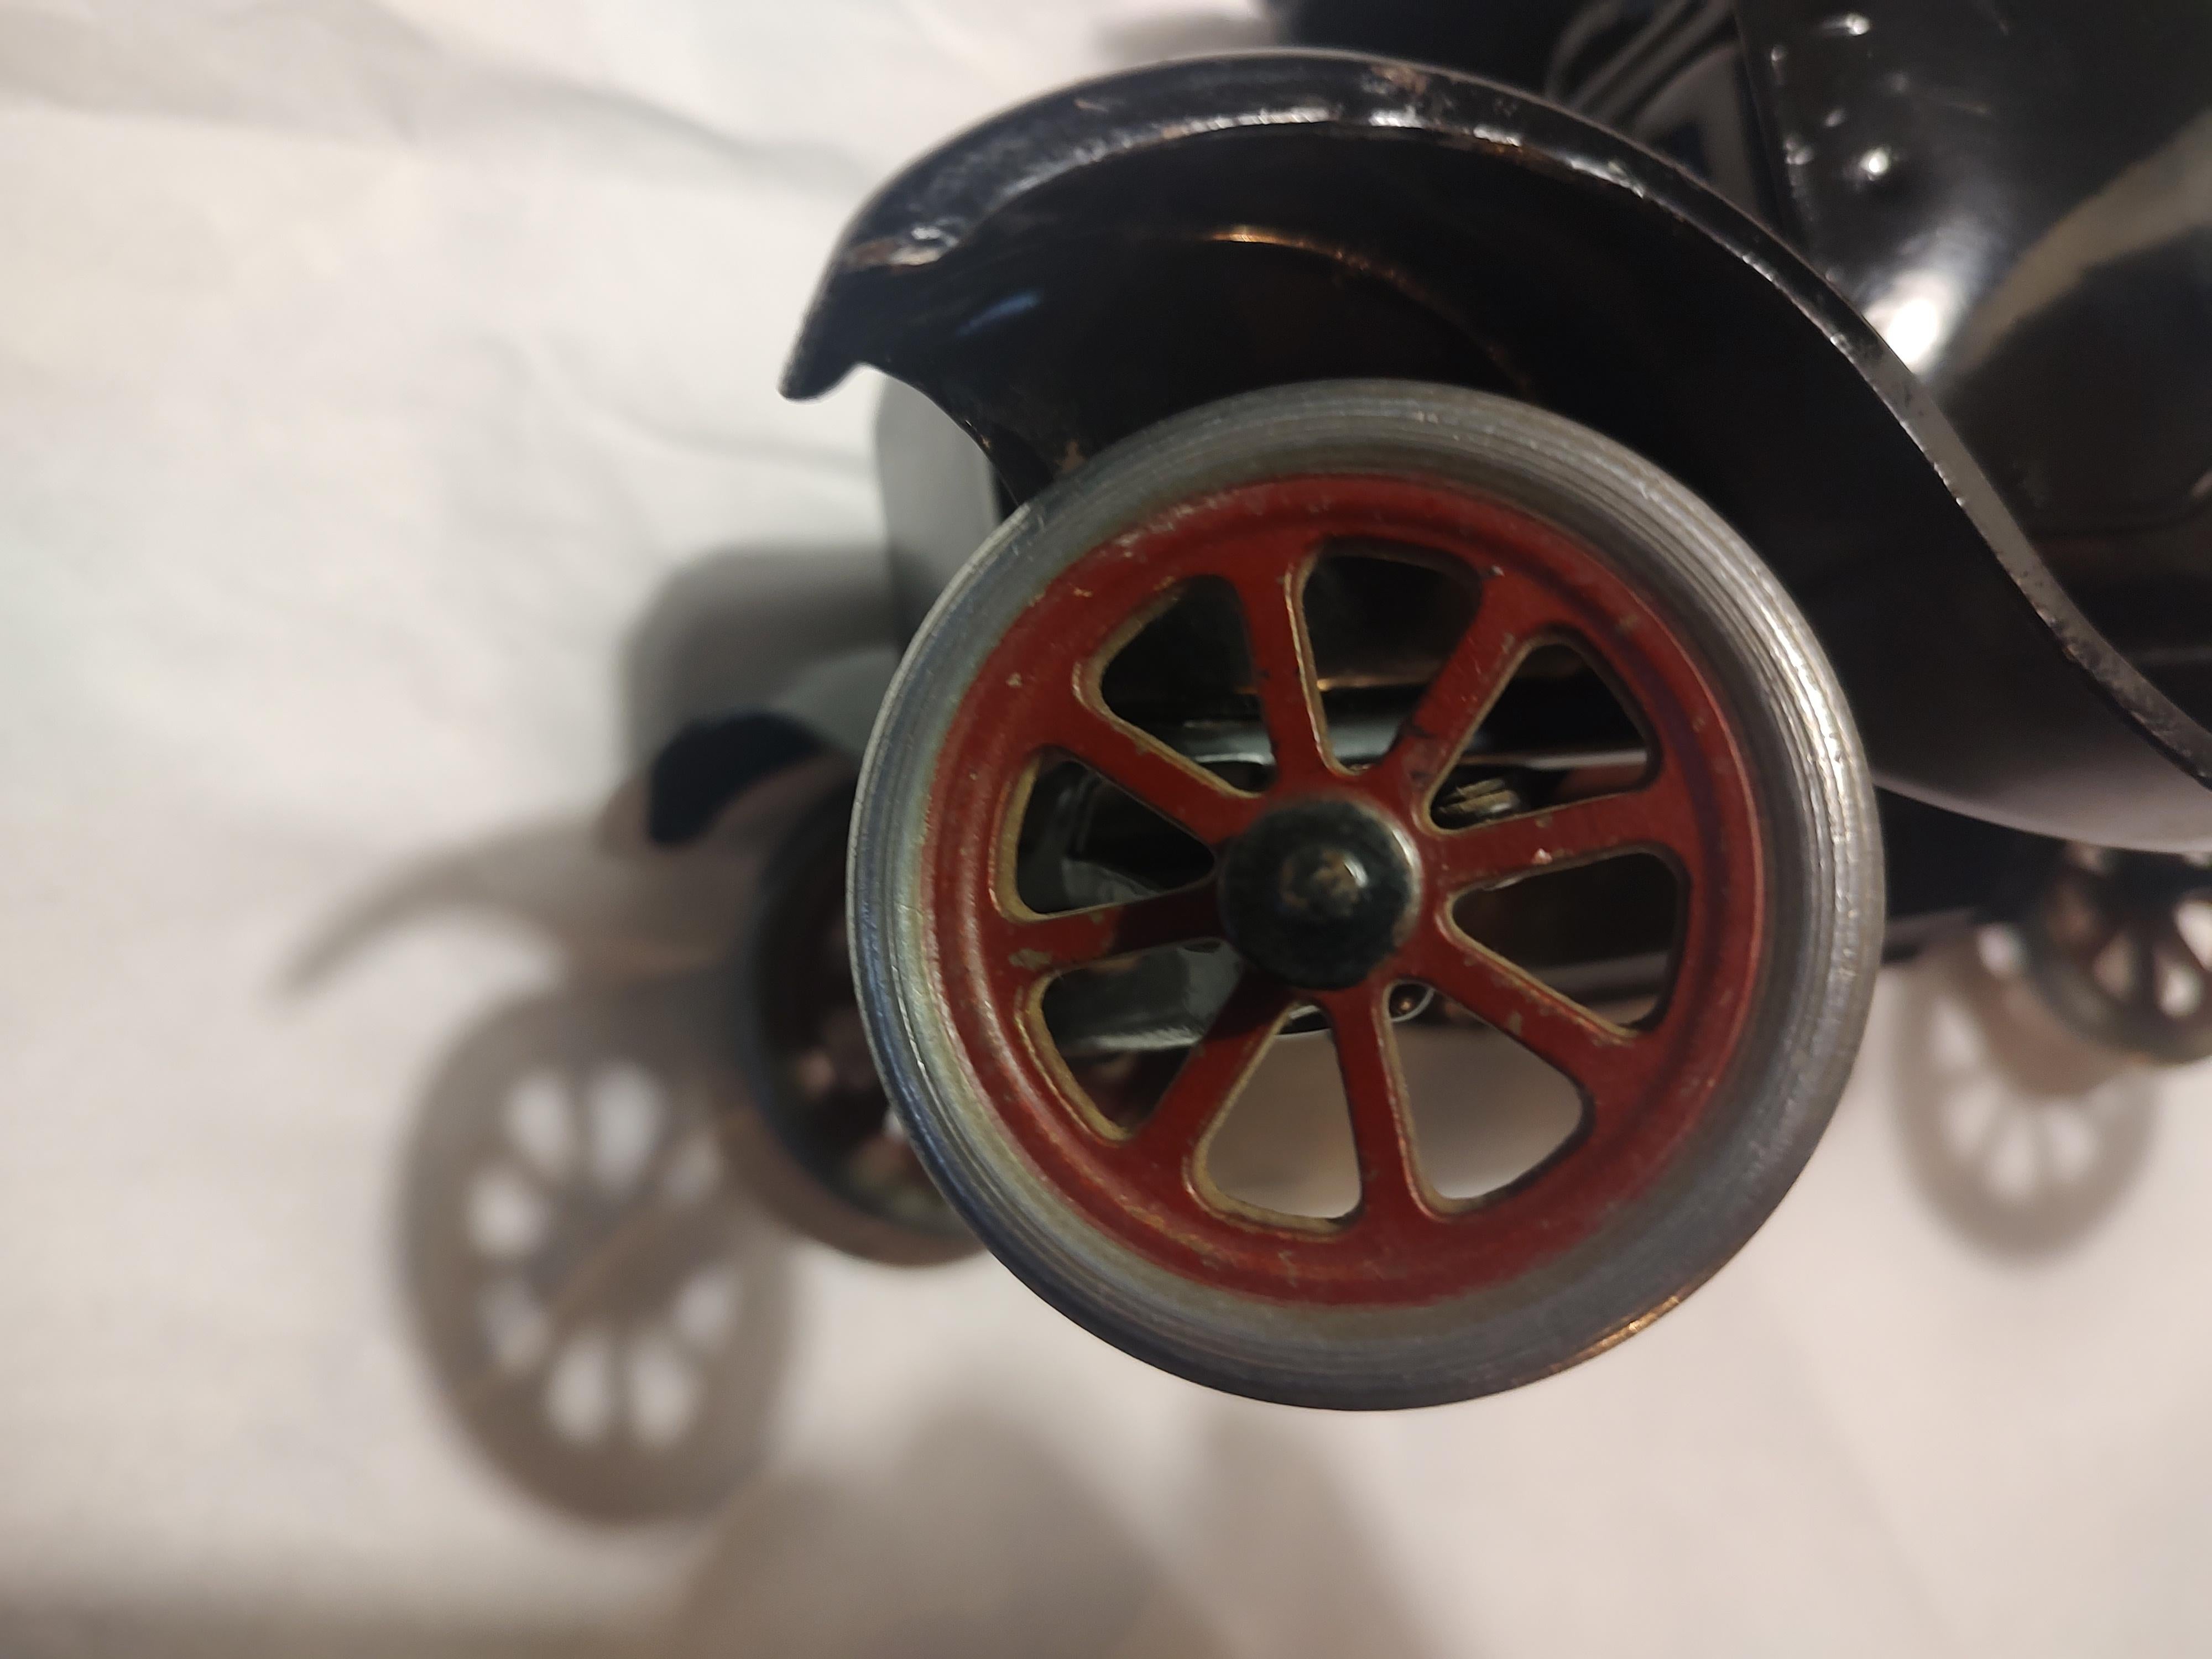 Fabulous pressed Steel toy model T by Buddy L from the twenties. In excellent antique condition with minimal wear. Car was repainted at one time and retains the original decal on the underside. Steering mechanism still controls the front wheels.